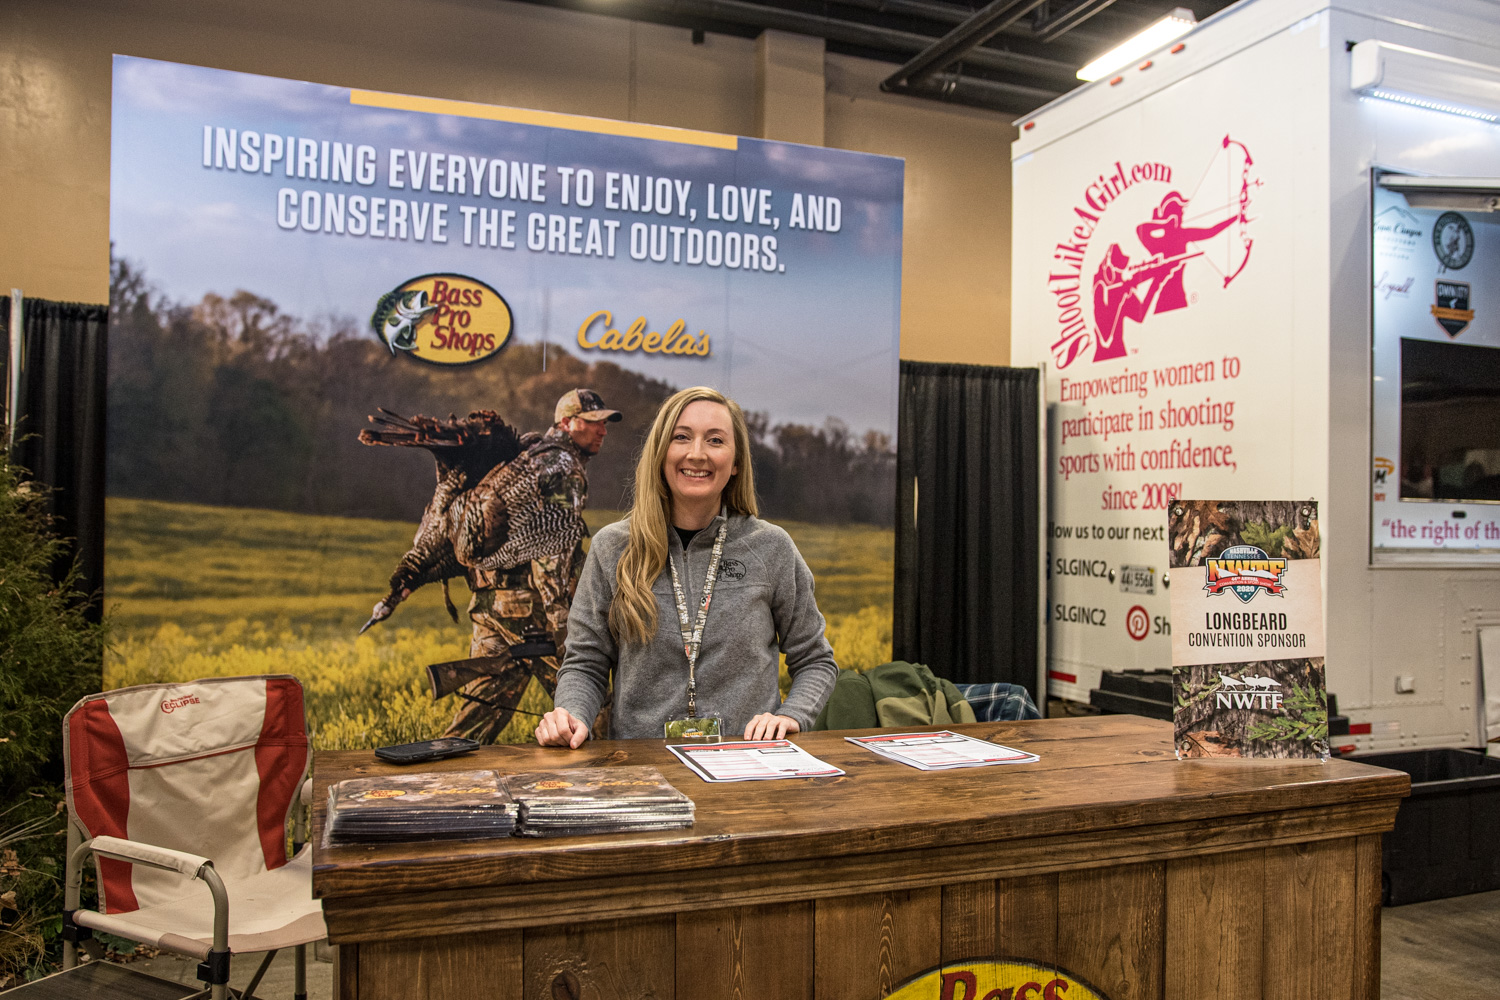 NWTF Convention The National Wild Turkey Federation